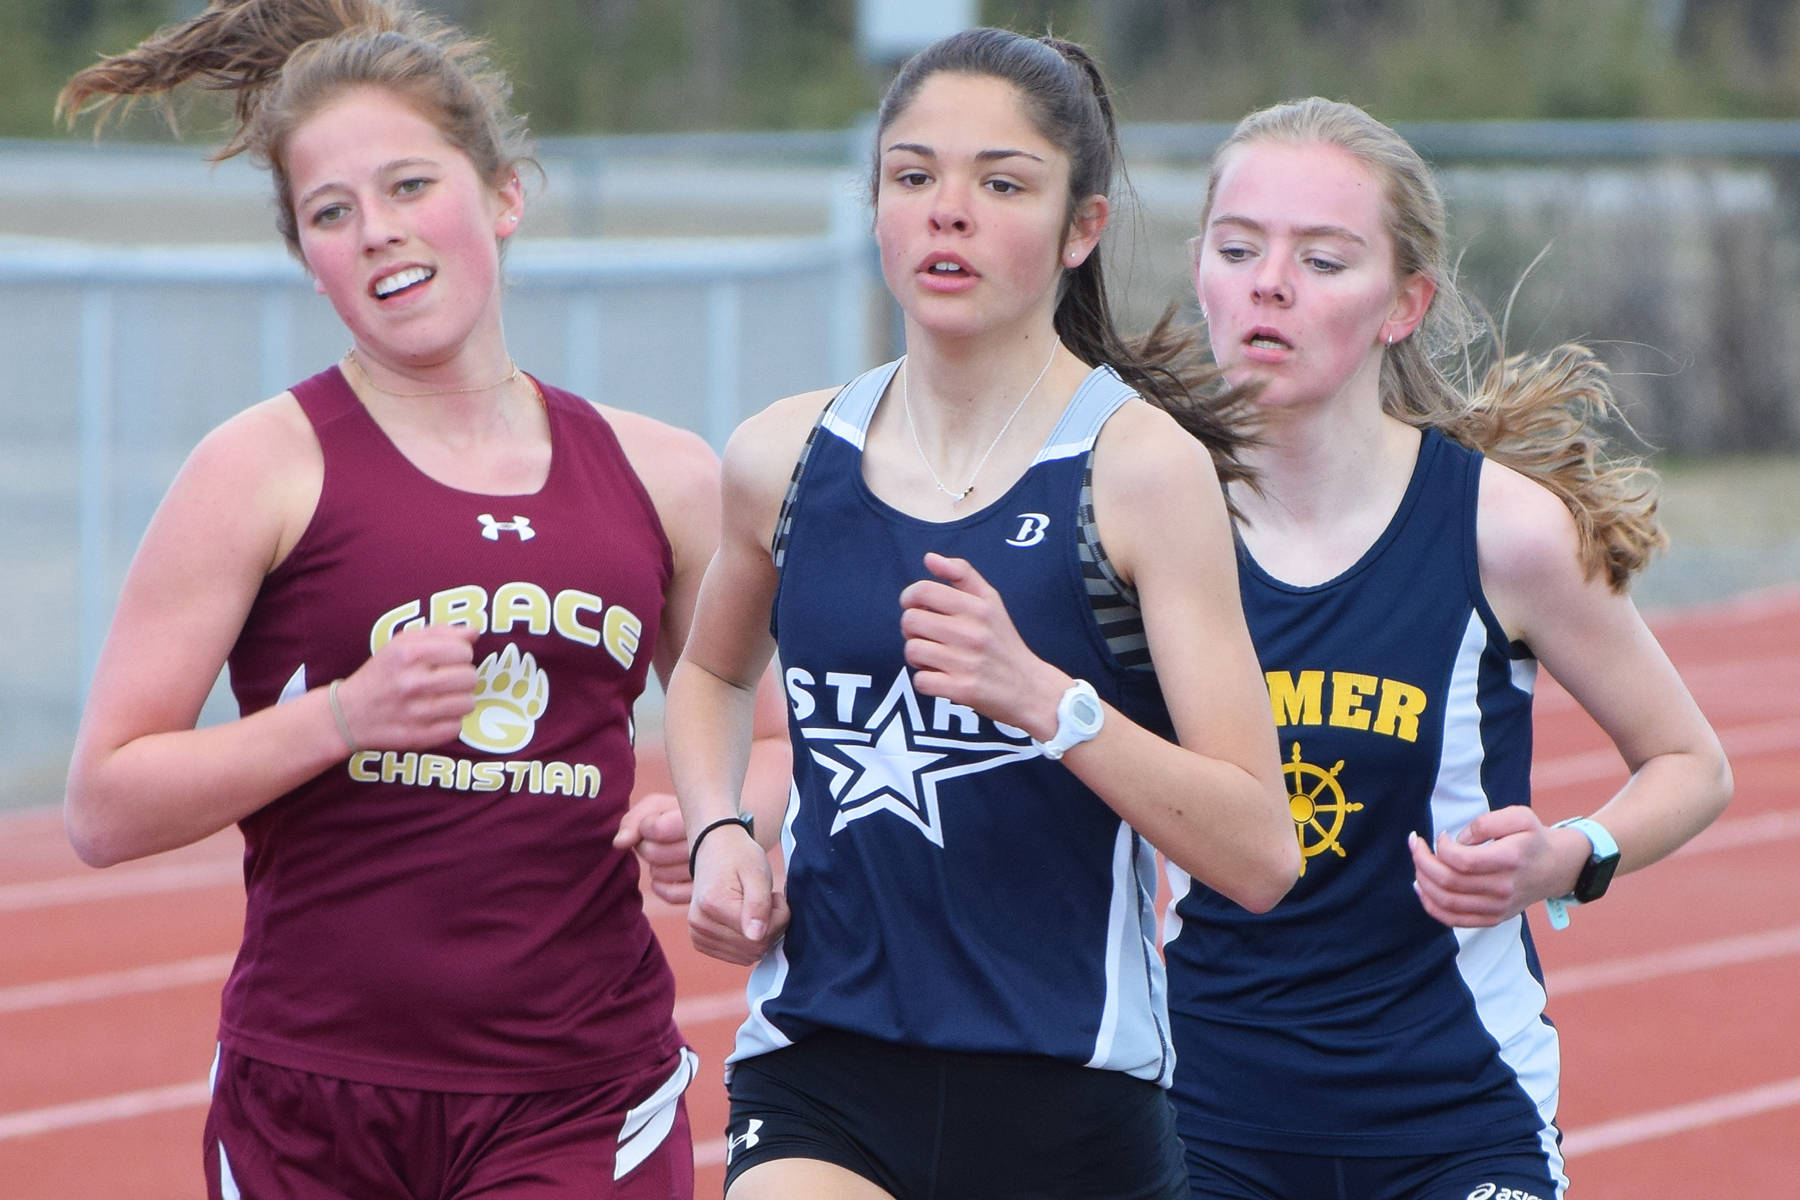 Soldotna’s Erika Arthur (front), Grace Christian’s Grace Annett and Homer’s Brooke Miller run in formation in the girls 1,600 meters Saturday, May 4, 2019, at the Kenai Invitational track meet at Kenai Central High School. (Photo by Joey Klecka/Peninsula Clarion)